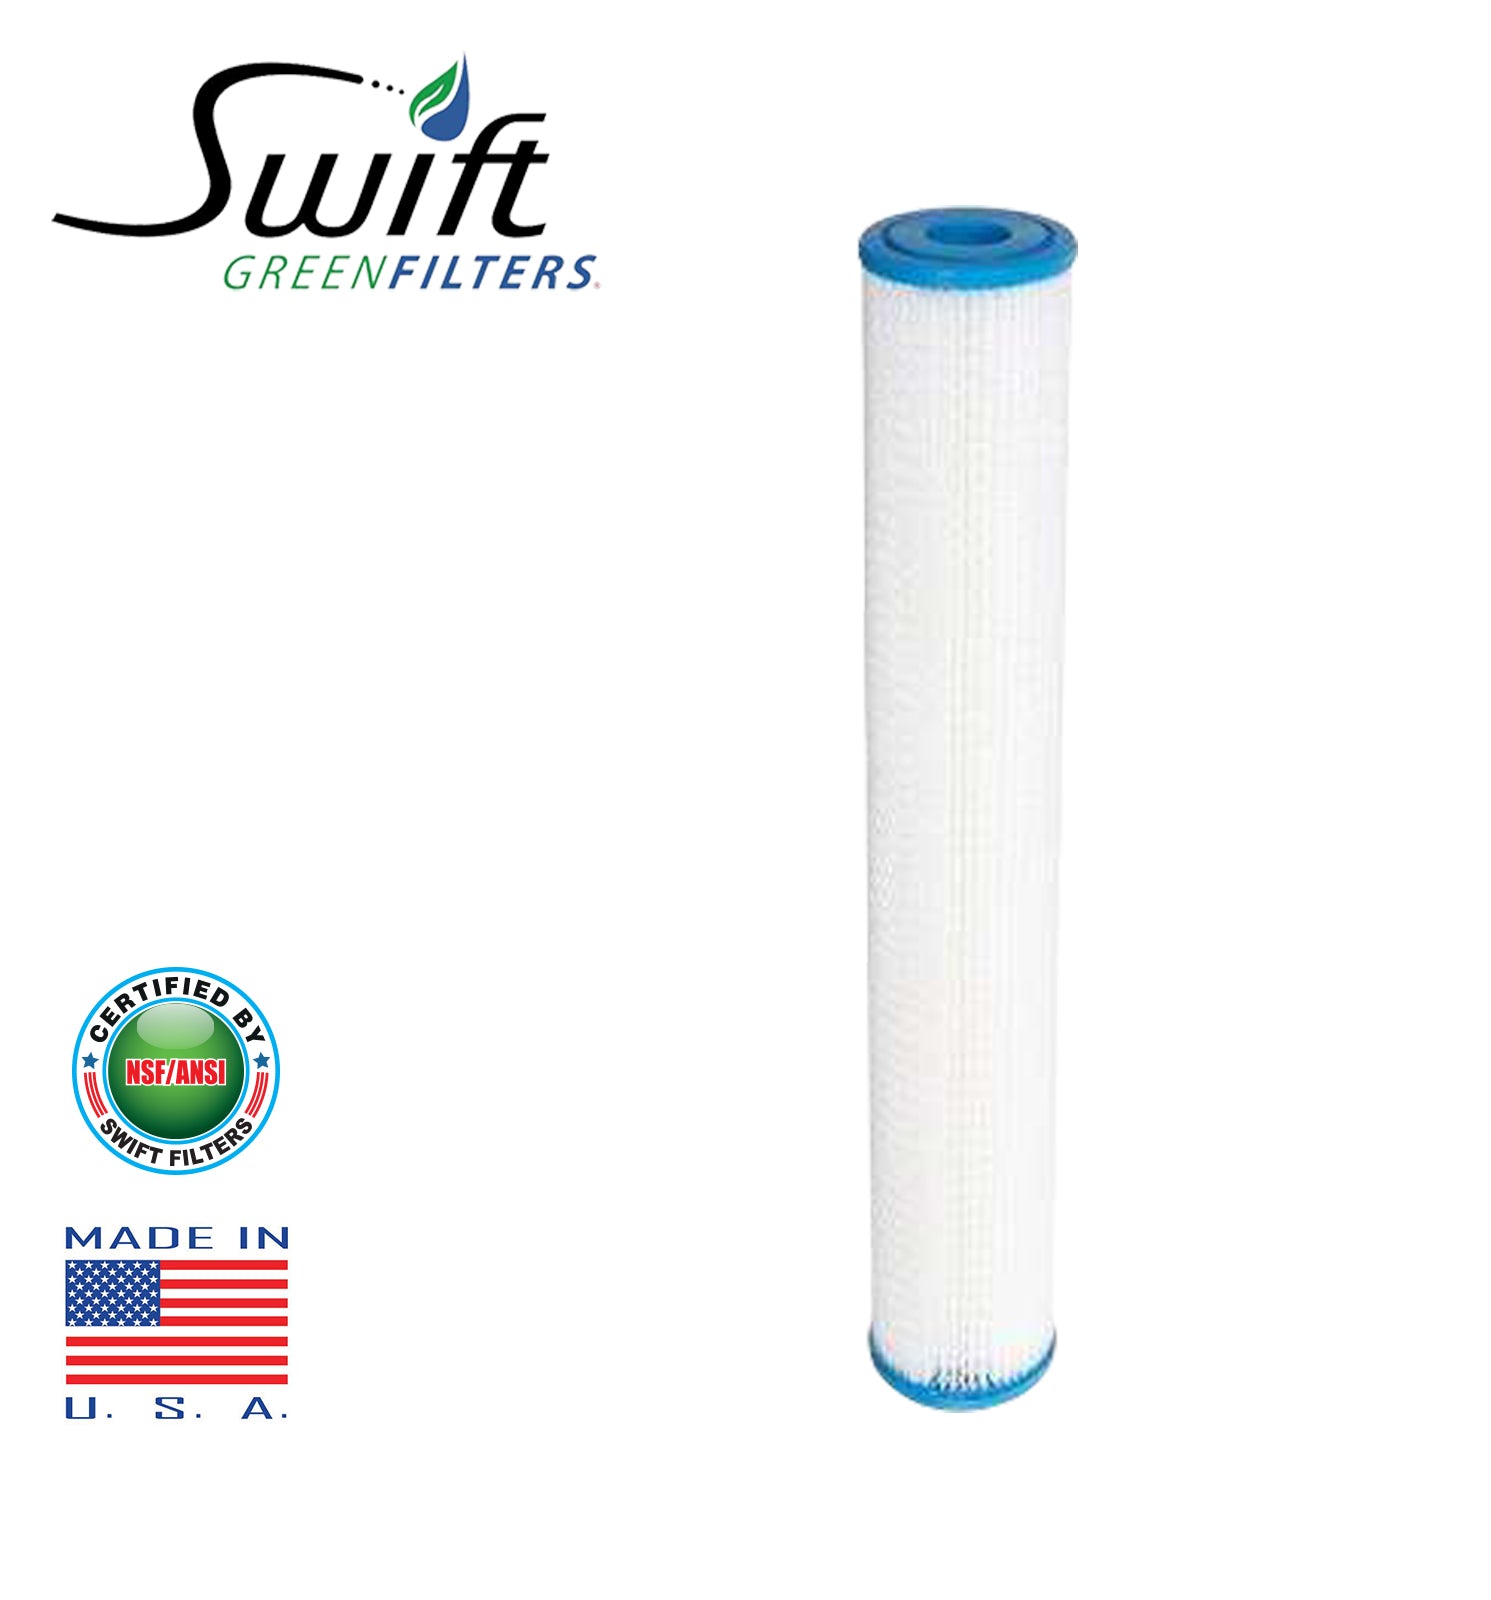 1 Micron Polyester Pleated Washable Sediment Water Filter 2.5" x 20" by Swift Green Filters